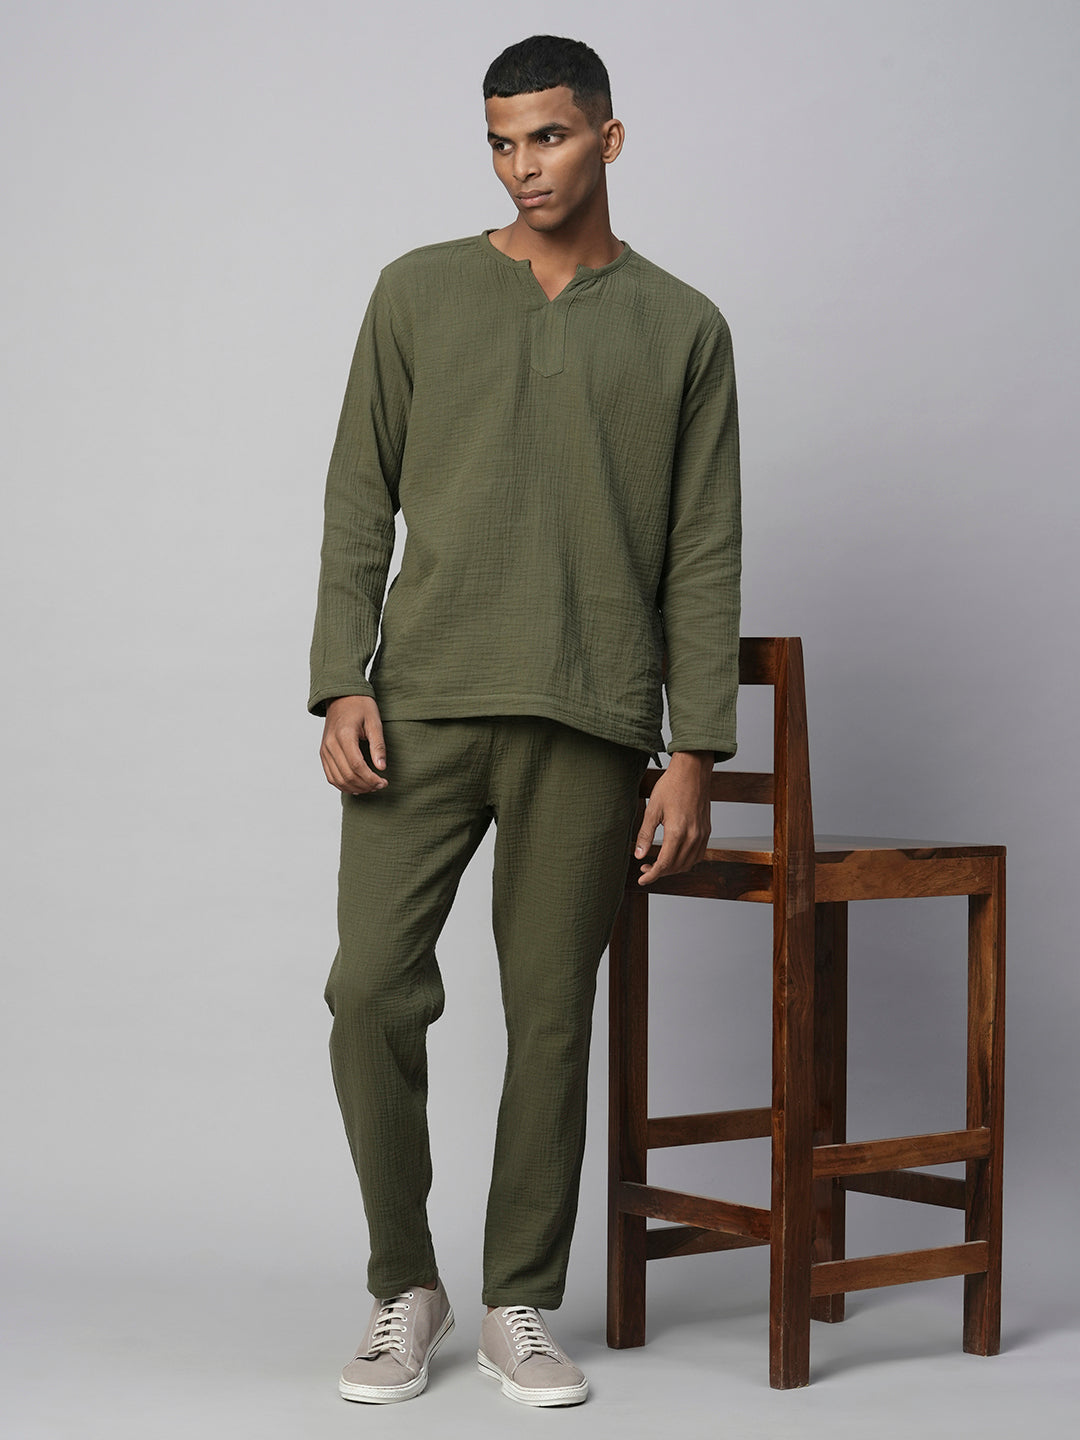 Men's Olive Cotton Tapered Fit Pant